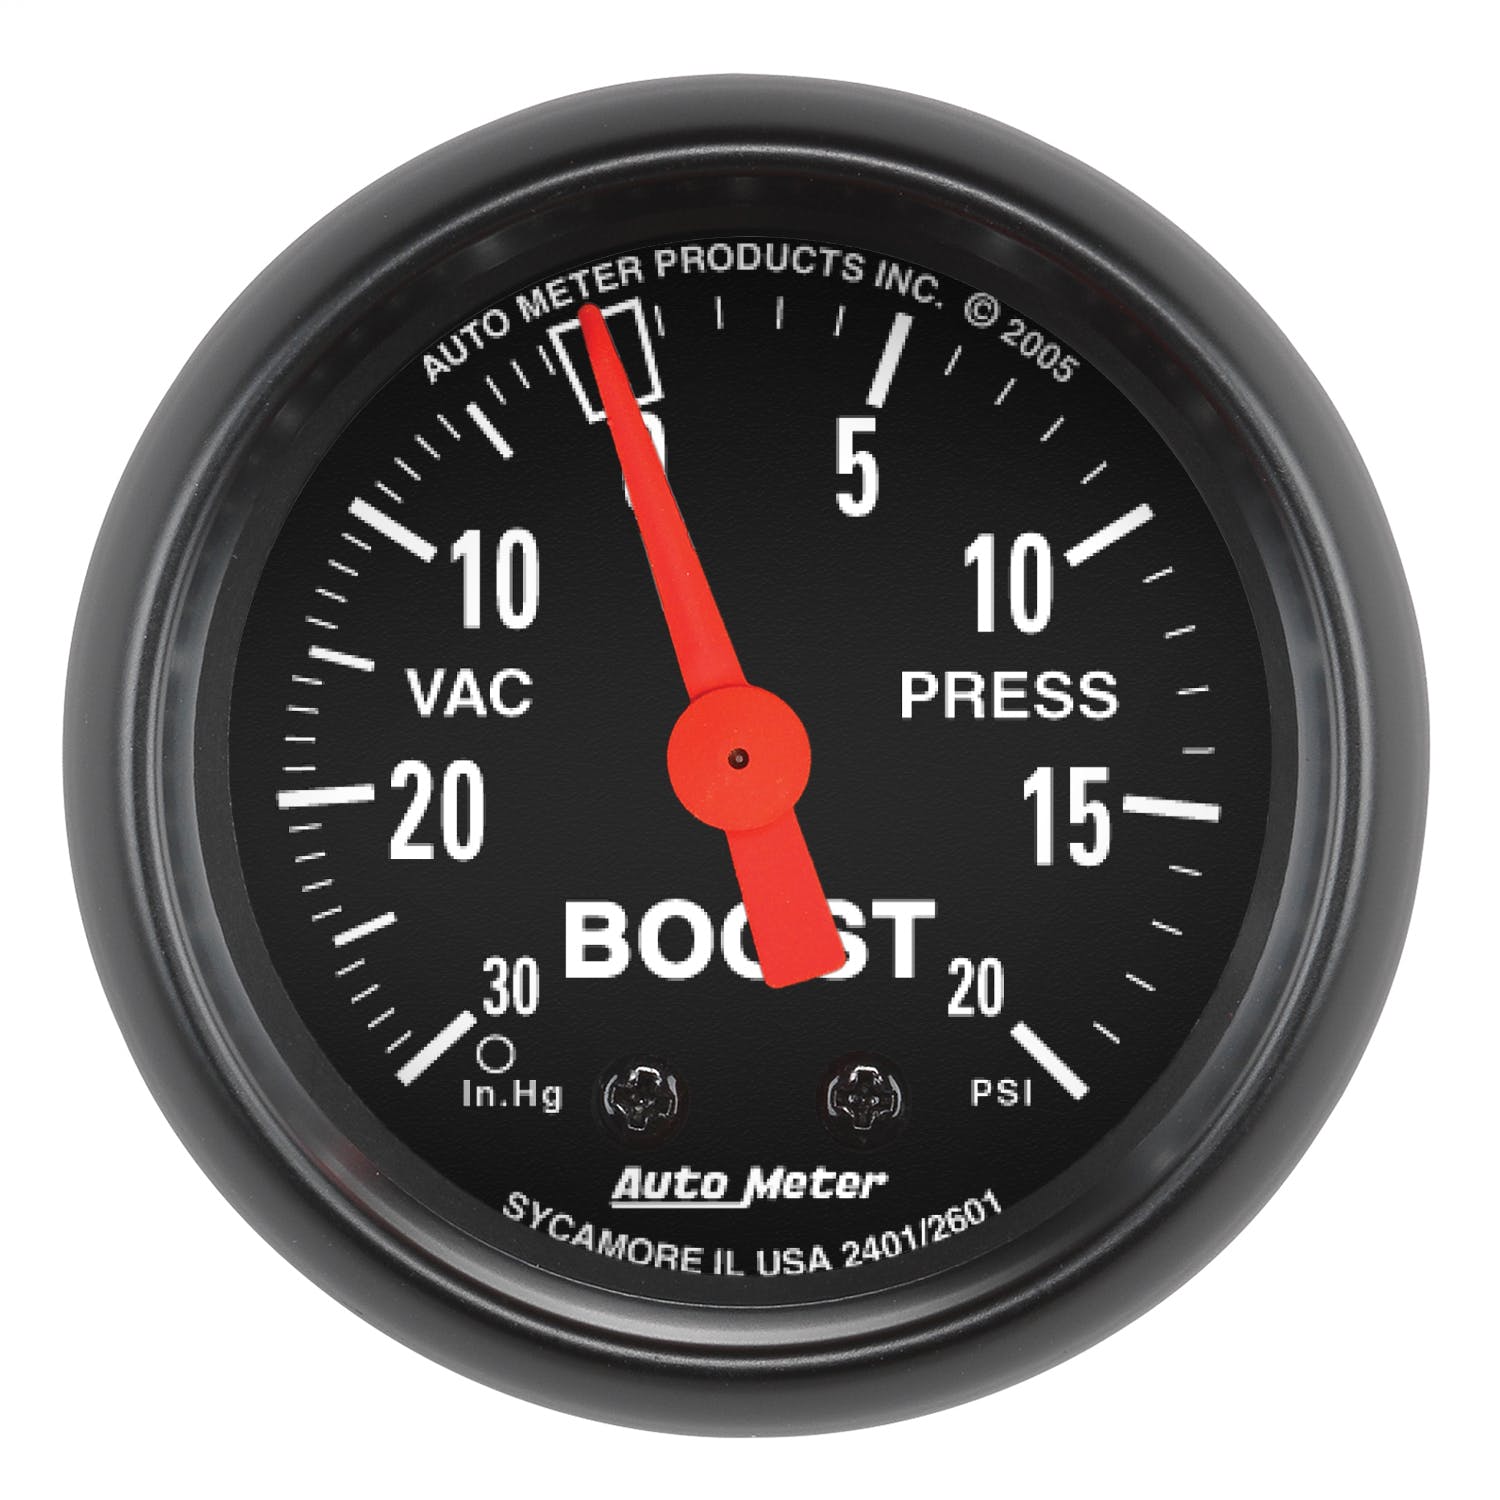 AutoMeter Products 2601 Boost/Vac 30 In. Hg-Vac/ 20 PSI